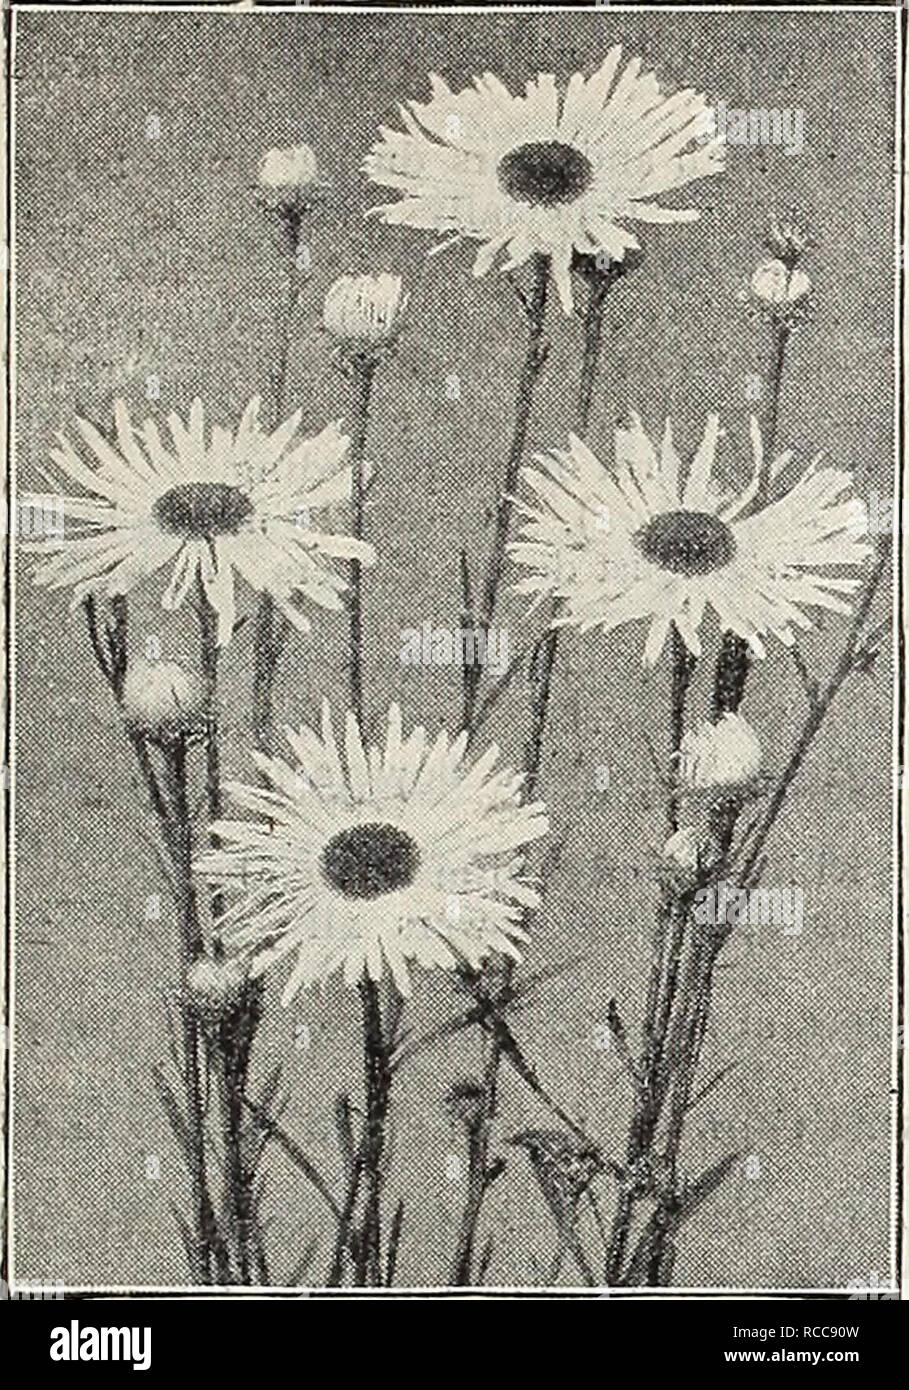 . Dreer's 1907 garden book. Seeds Catalogs; Nursery stock Catalogs; Gardening Equipment and supplies Catalogs; Flowers Seeds Catalogs; Vegetables Seeds Catalogs; Fruit Seeds Catalogs. HBKTAfHHR lwi|A#WHW PEREMMIAL PLANTS. BuLTONIA La n.SQUAM . CAI^IMBRIS (Star Wort) Incisa. An attractive plant for the border; grows 12 10 18 inches high, producing from July to Septem- ber daisy-like pale lavender flowers with yellow centre. 15 cts. each ; §1.50 per doz. CALLIRHOE. (Poppy Mallow.) Involucrata. An elegant trail- ing plant, with finely divided fol- iage and large saucer-shaped flow eisof bright r Stock Photo